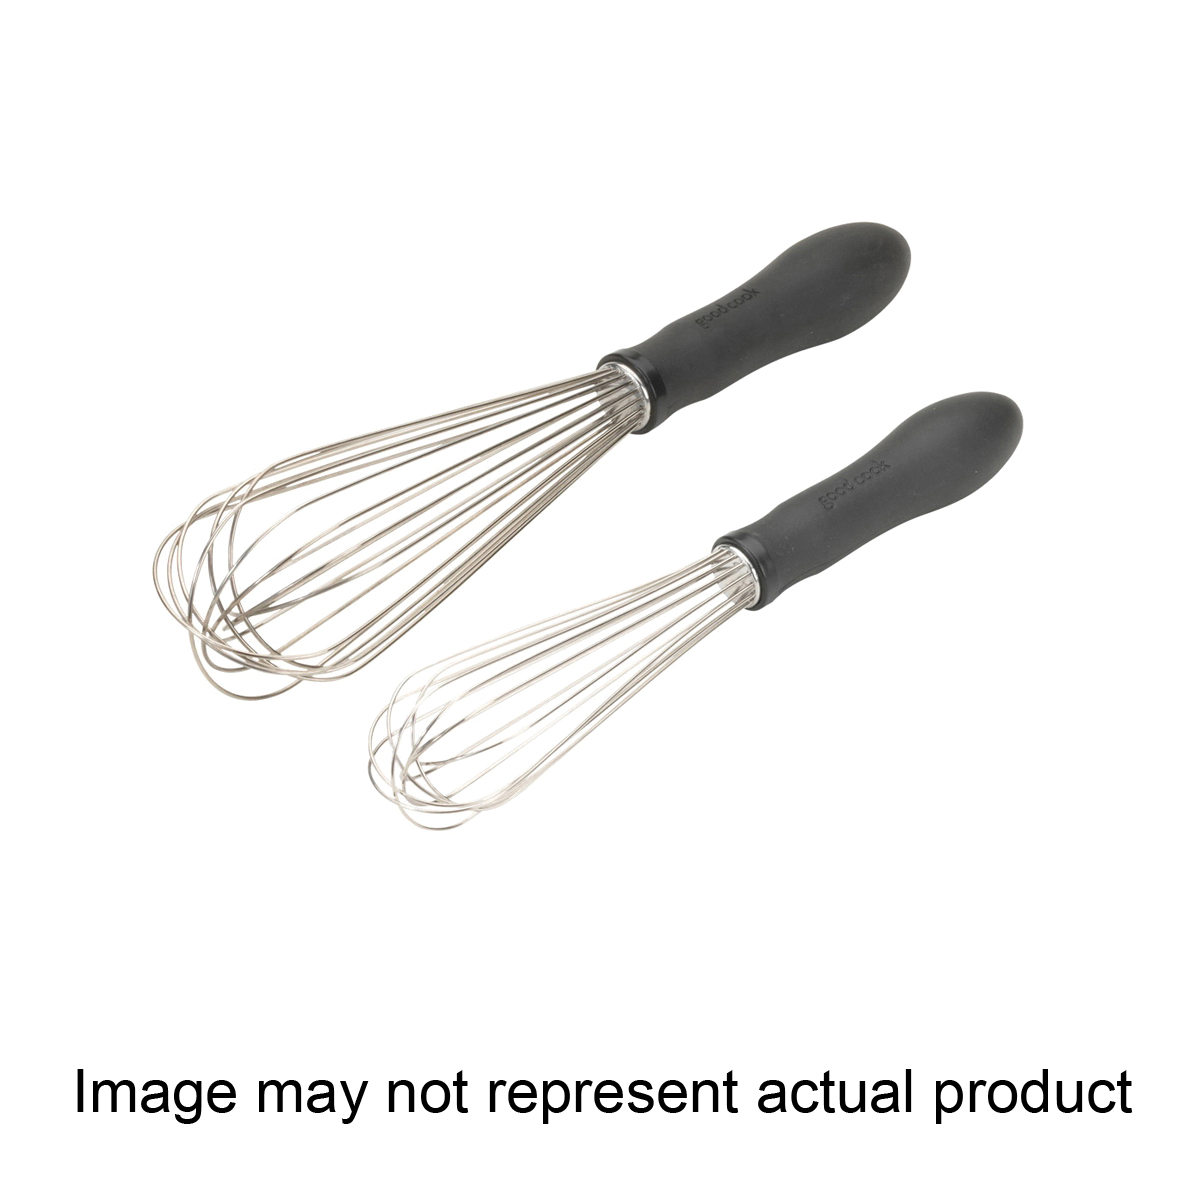 20451 Whisk, 9 in OAL, Stainless Steel